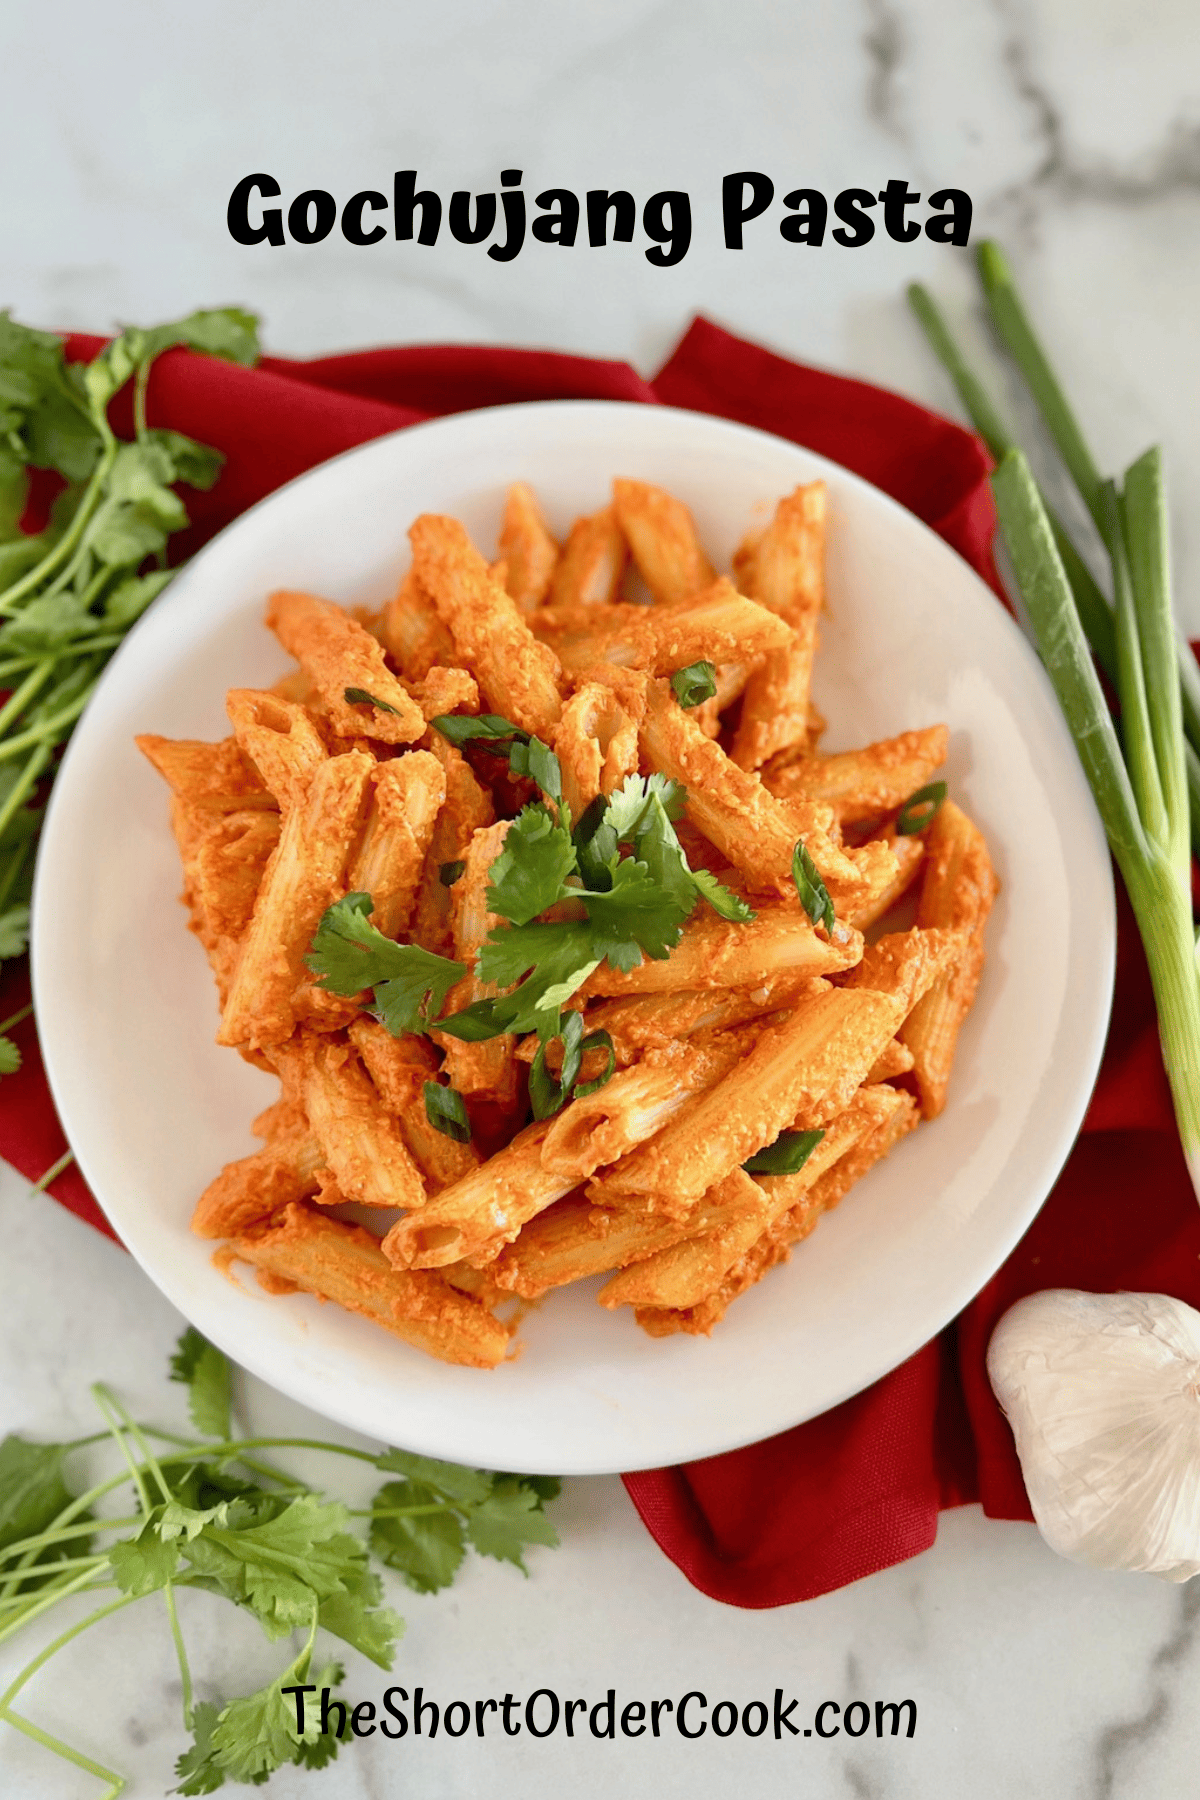 Pasta with gochujang and cheese sauce on a plate.